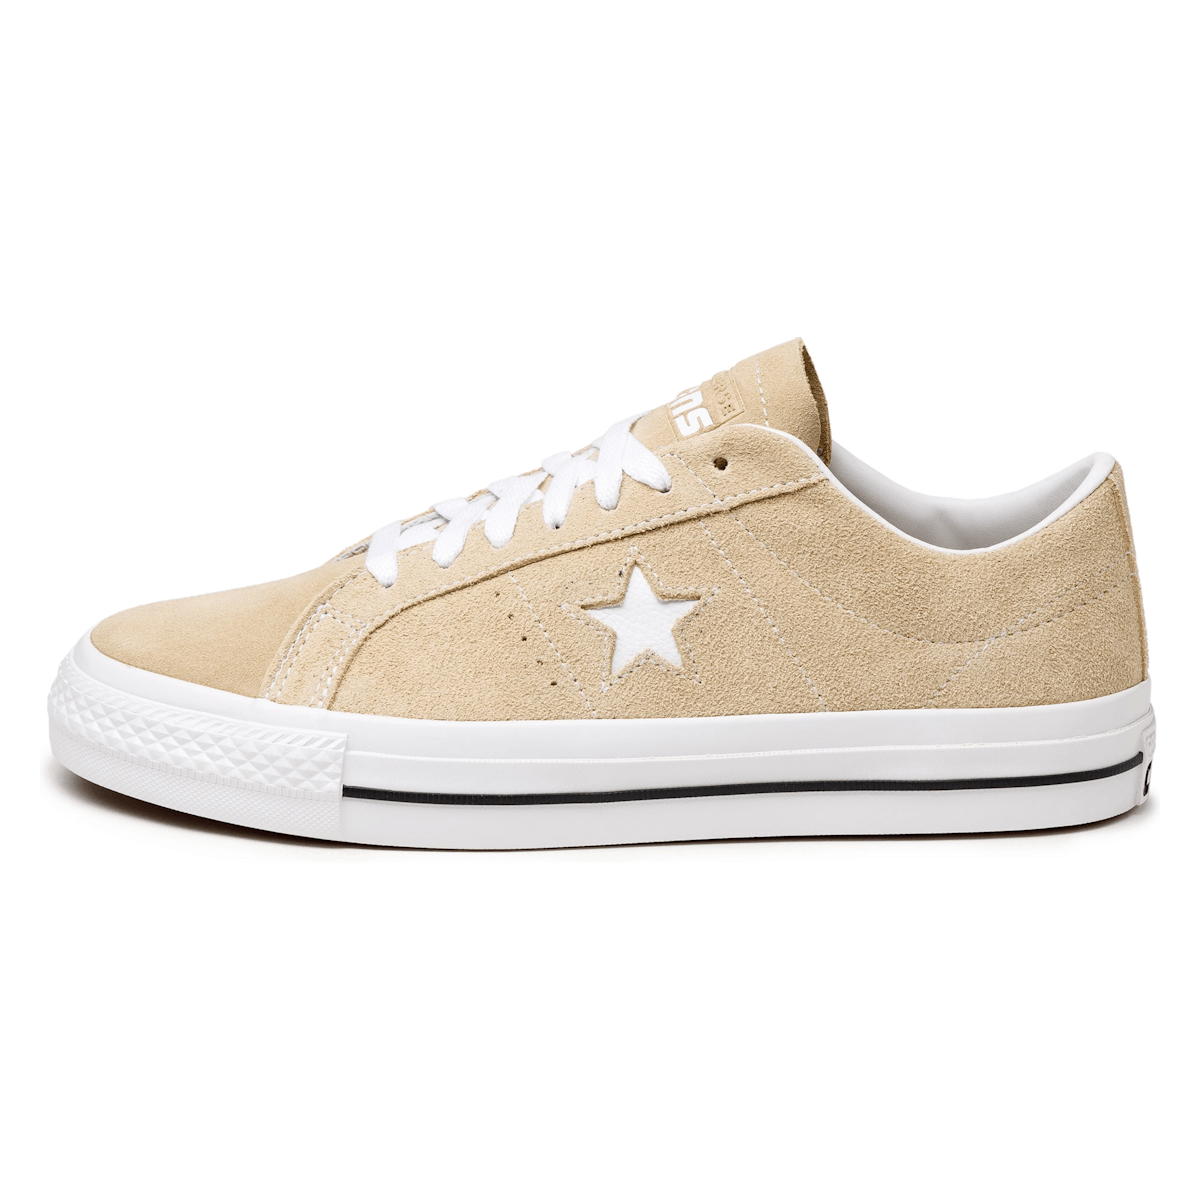 Converse One Star Pro OX Classic Suede